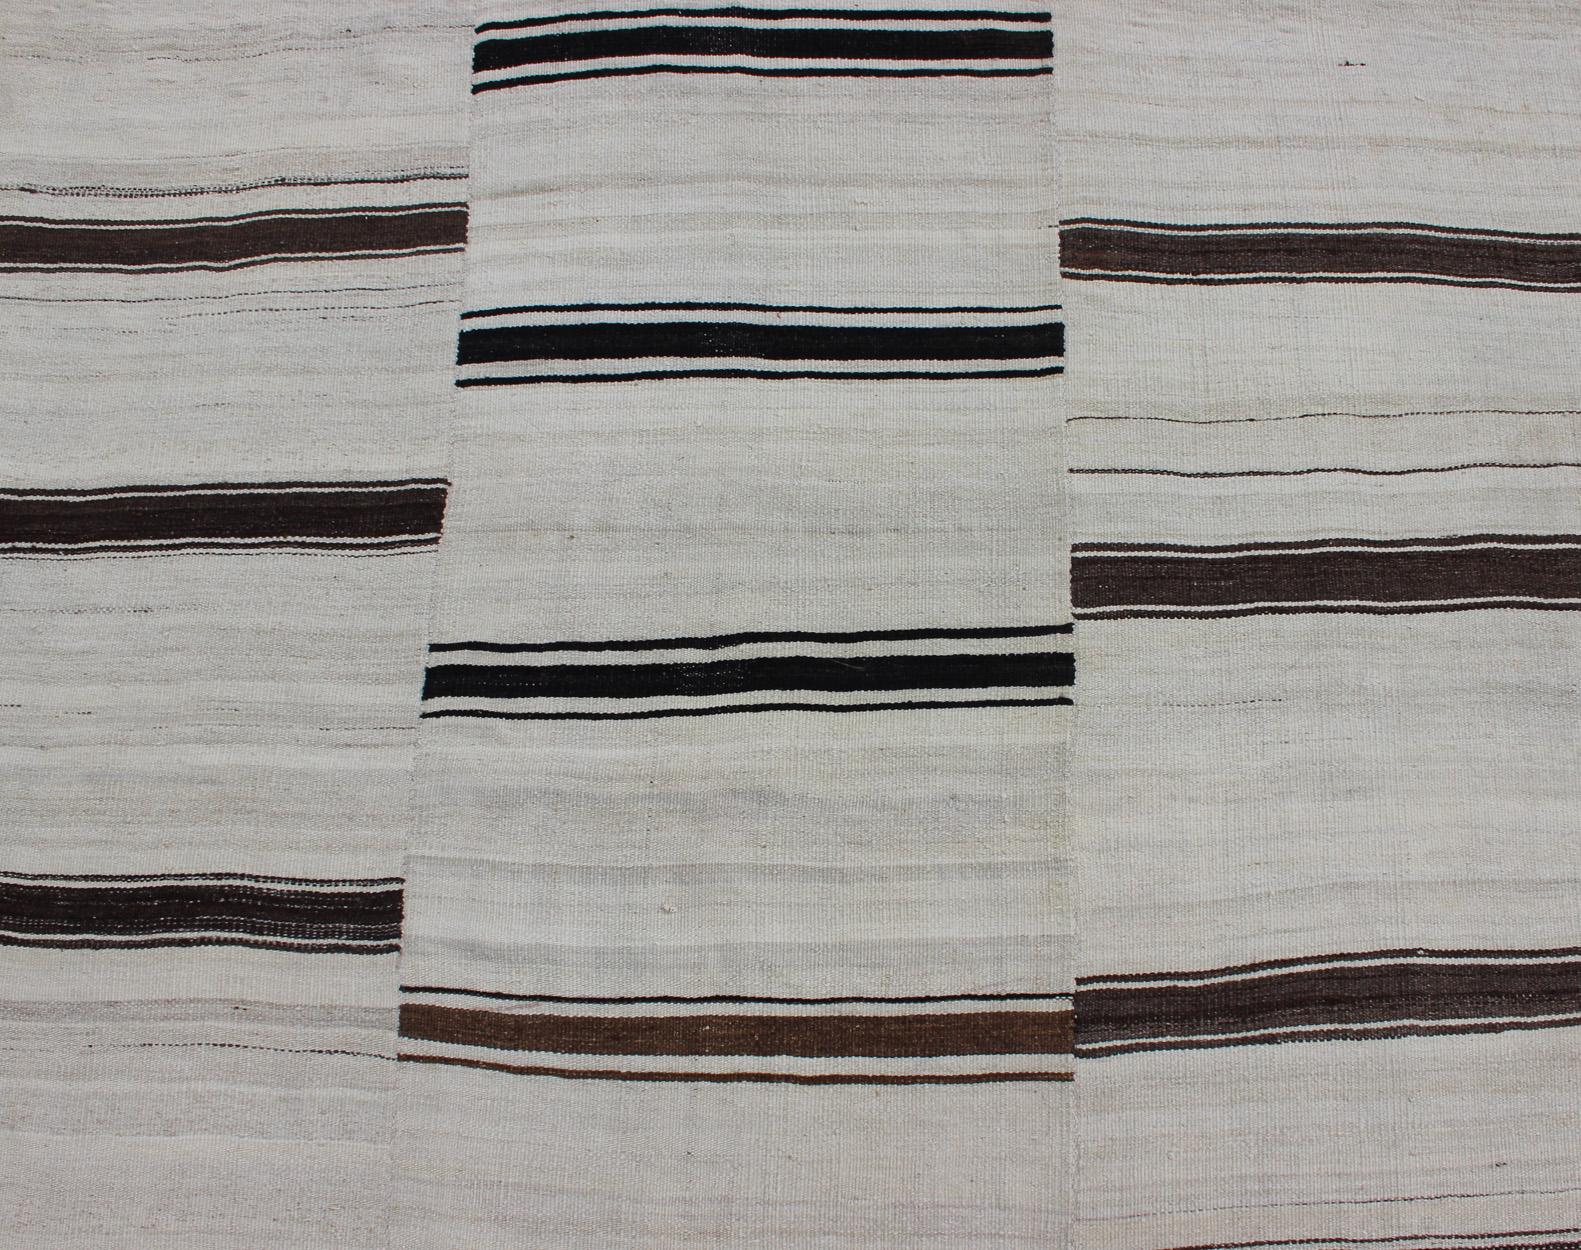 Large Vintage Turkish Kilim Rug With Vertical Stripes in Cream and Brown Stripes For Sale 4